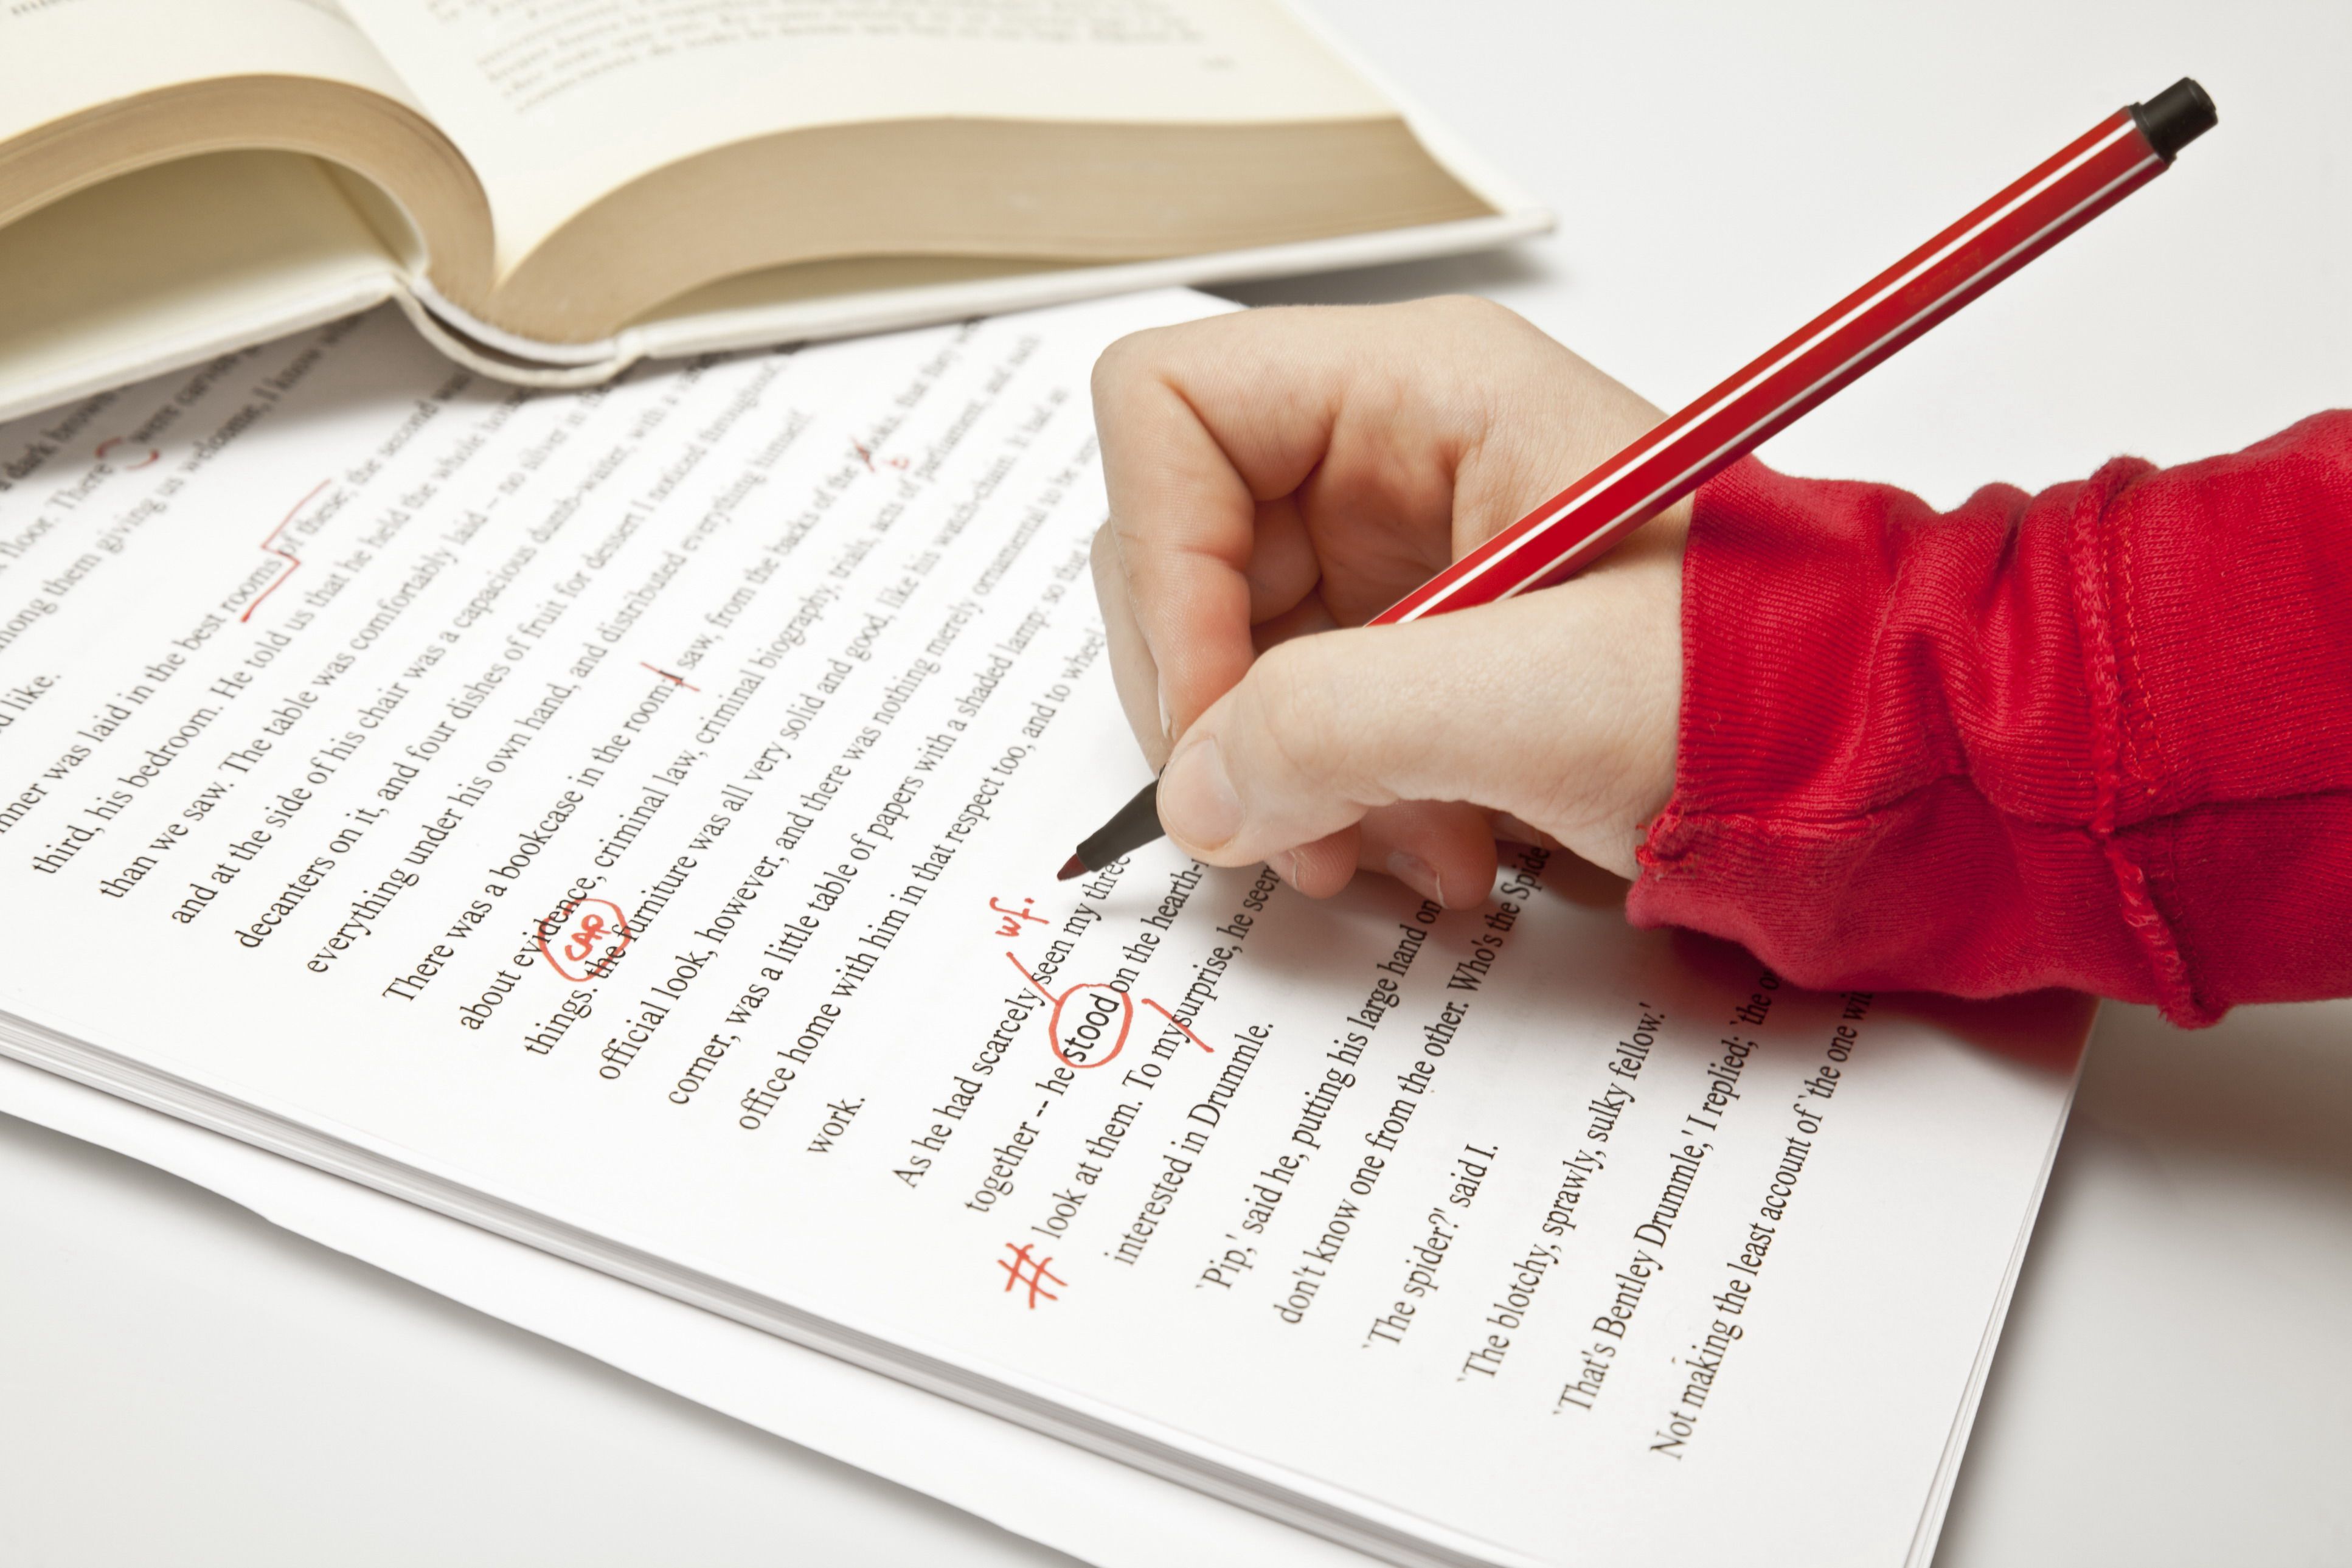 How to write a proofreading assignment, Writing service